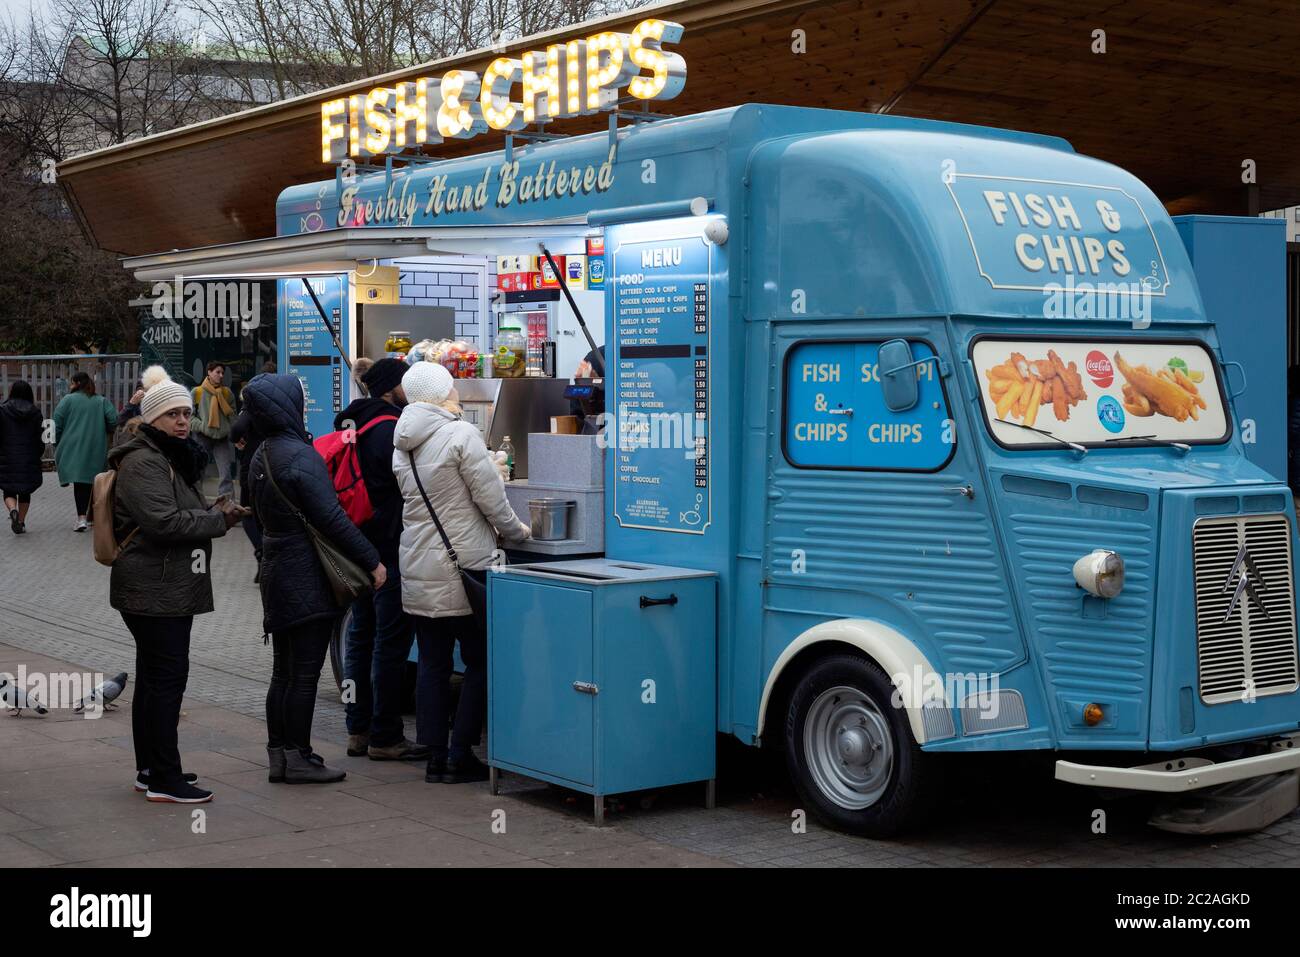 Street food London truck People and tourists queueing for fish and chips at a vintage style blue van as a mobile food stall on the Southbank in London Stock Photo